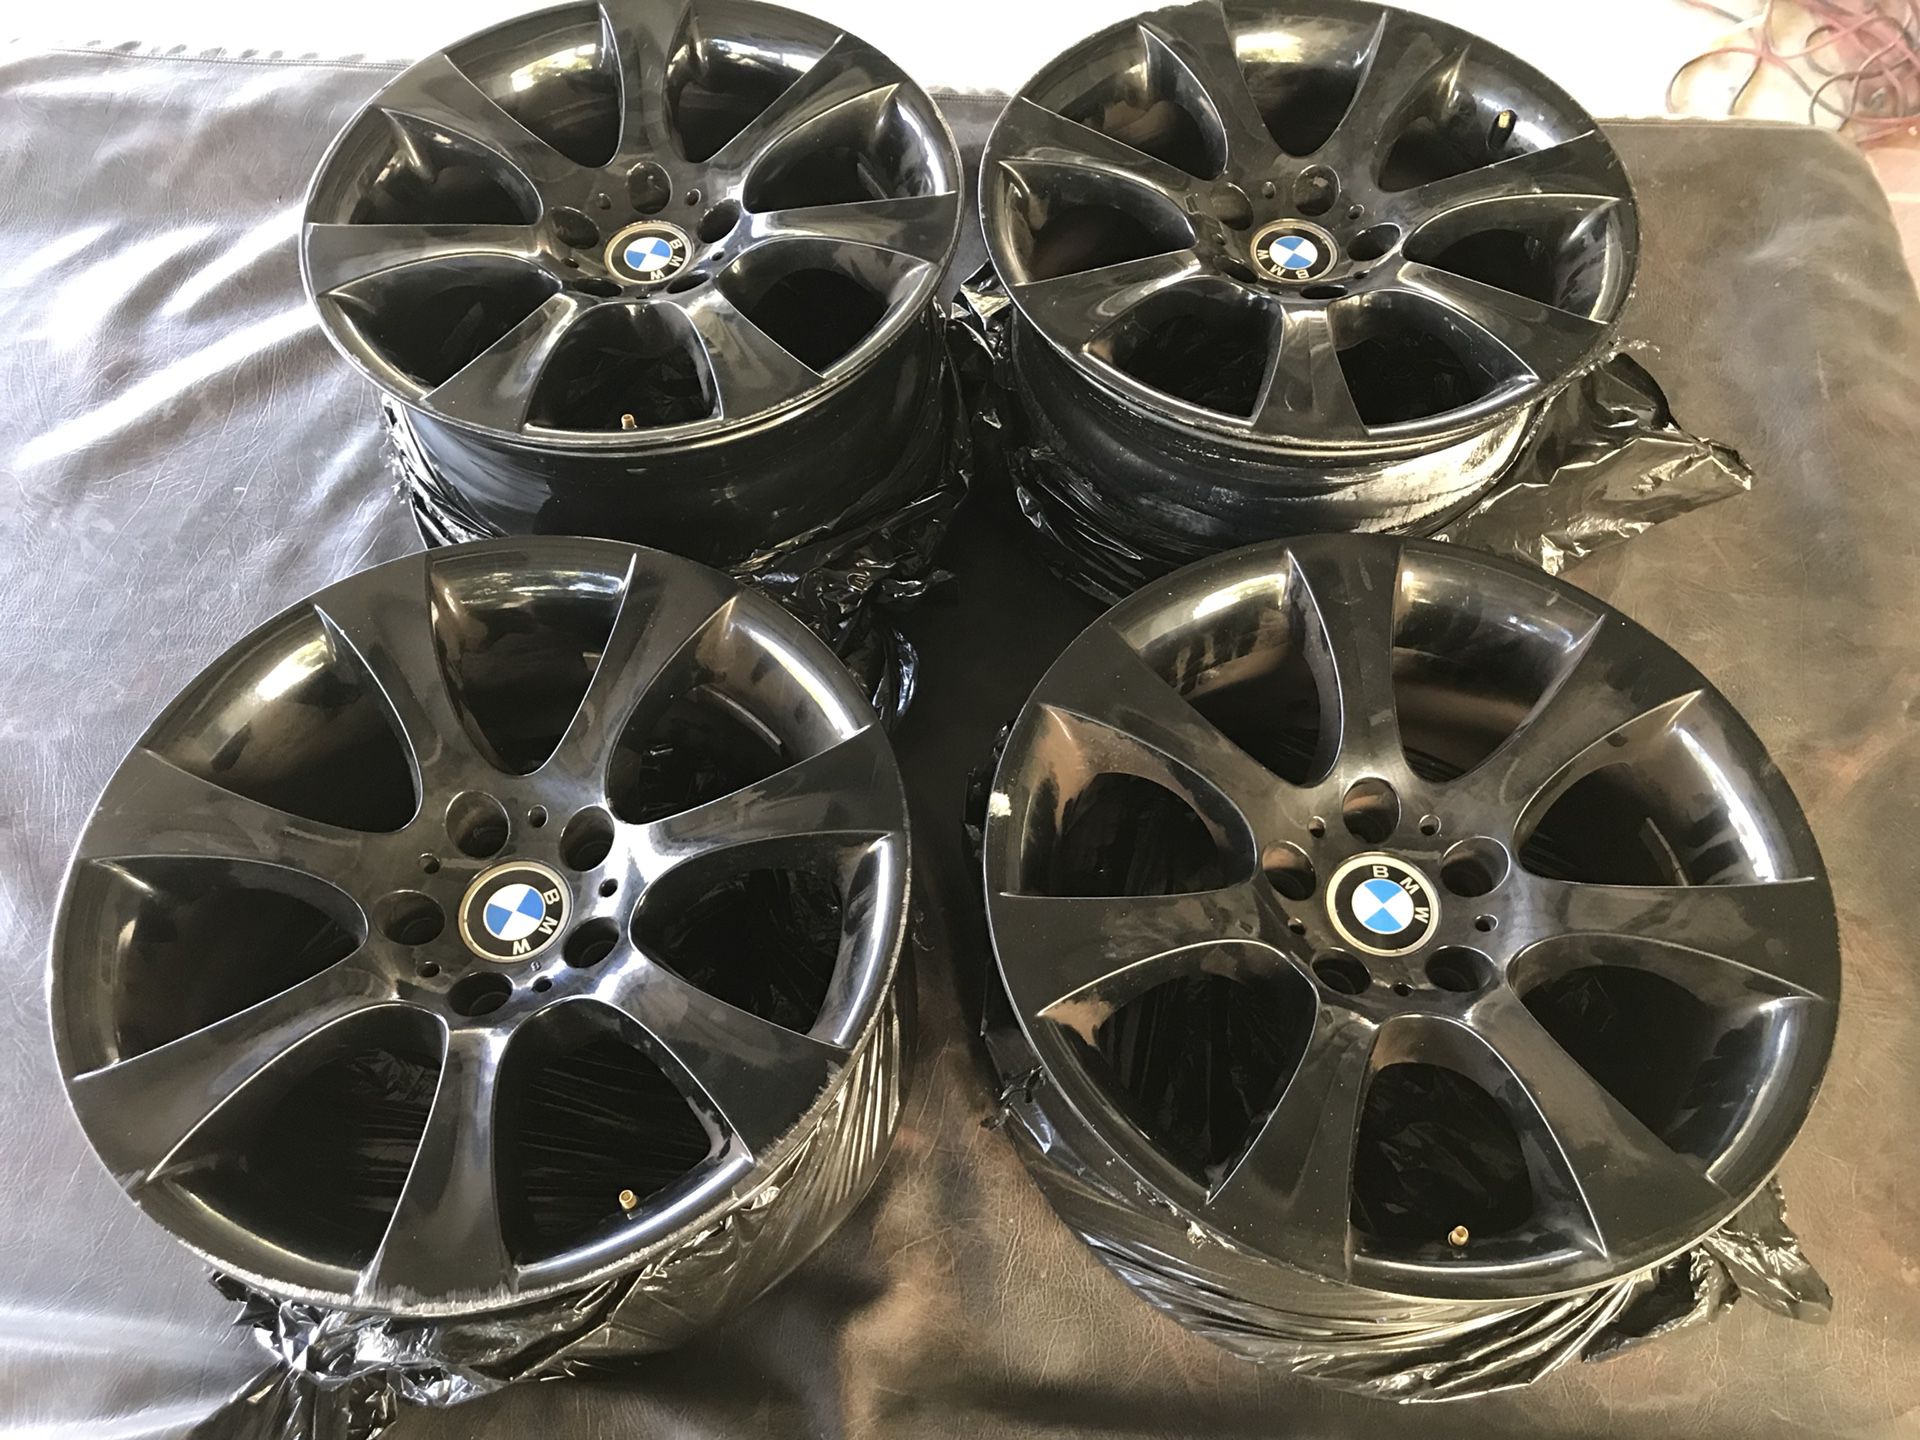 pad Seminar Deformation BMW E60 E61 Style 124 Star Spoke Light Alloy Wheel Rim Staggered Set 18x9 &  18x8 BBS Rims NO GOOD! for Sale in Los Angeles, CA - OfferUp